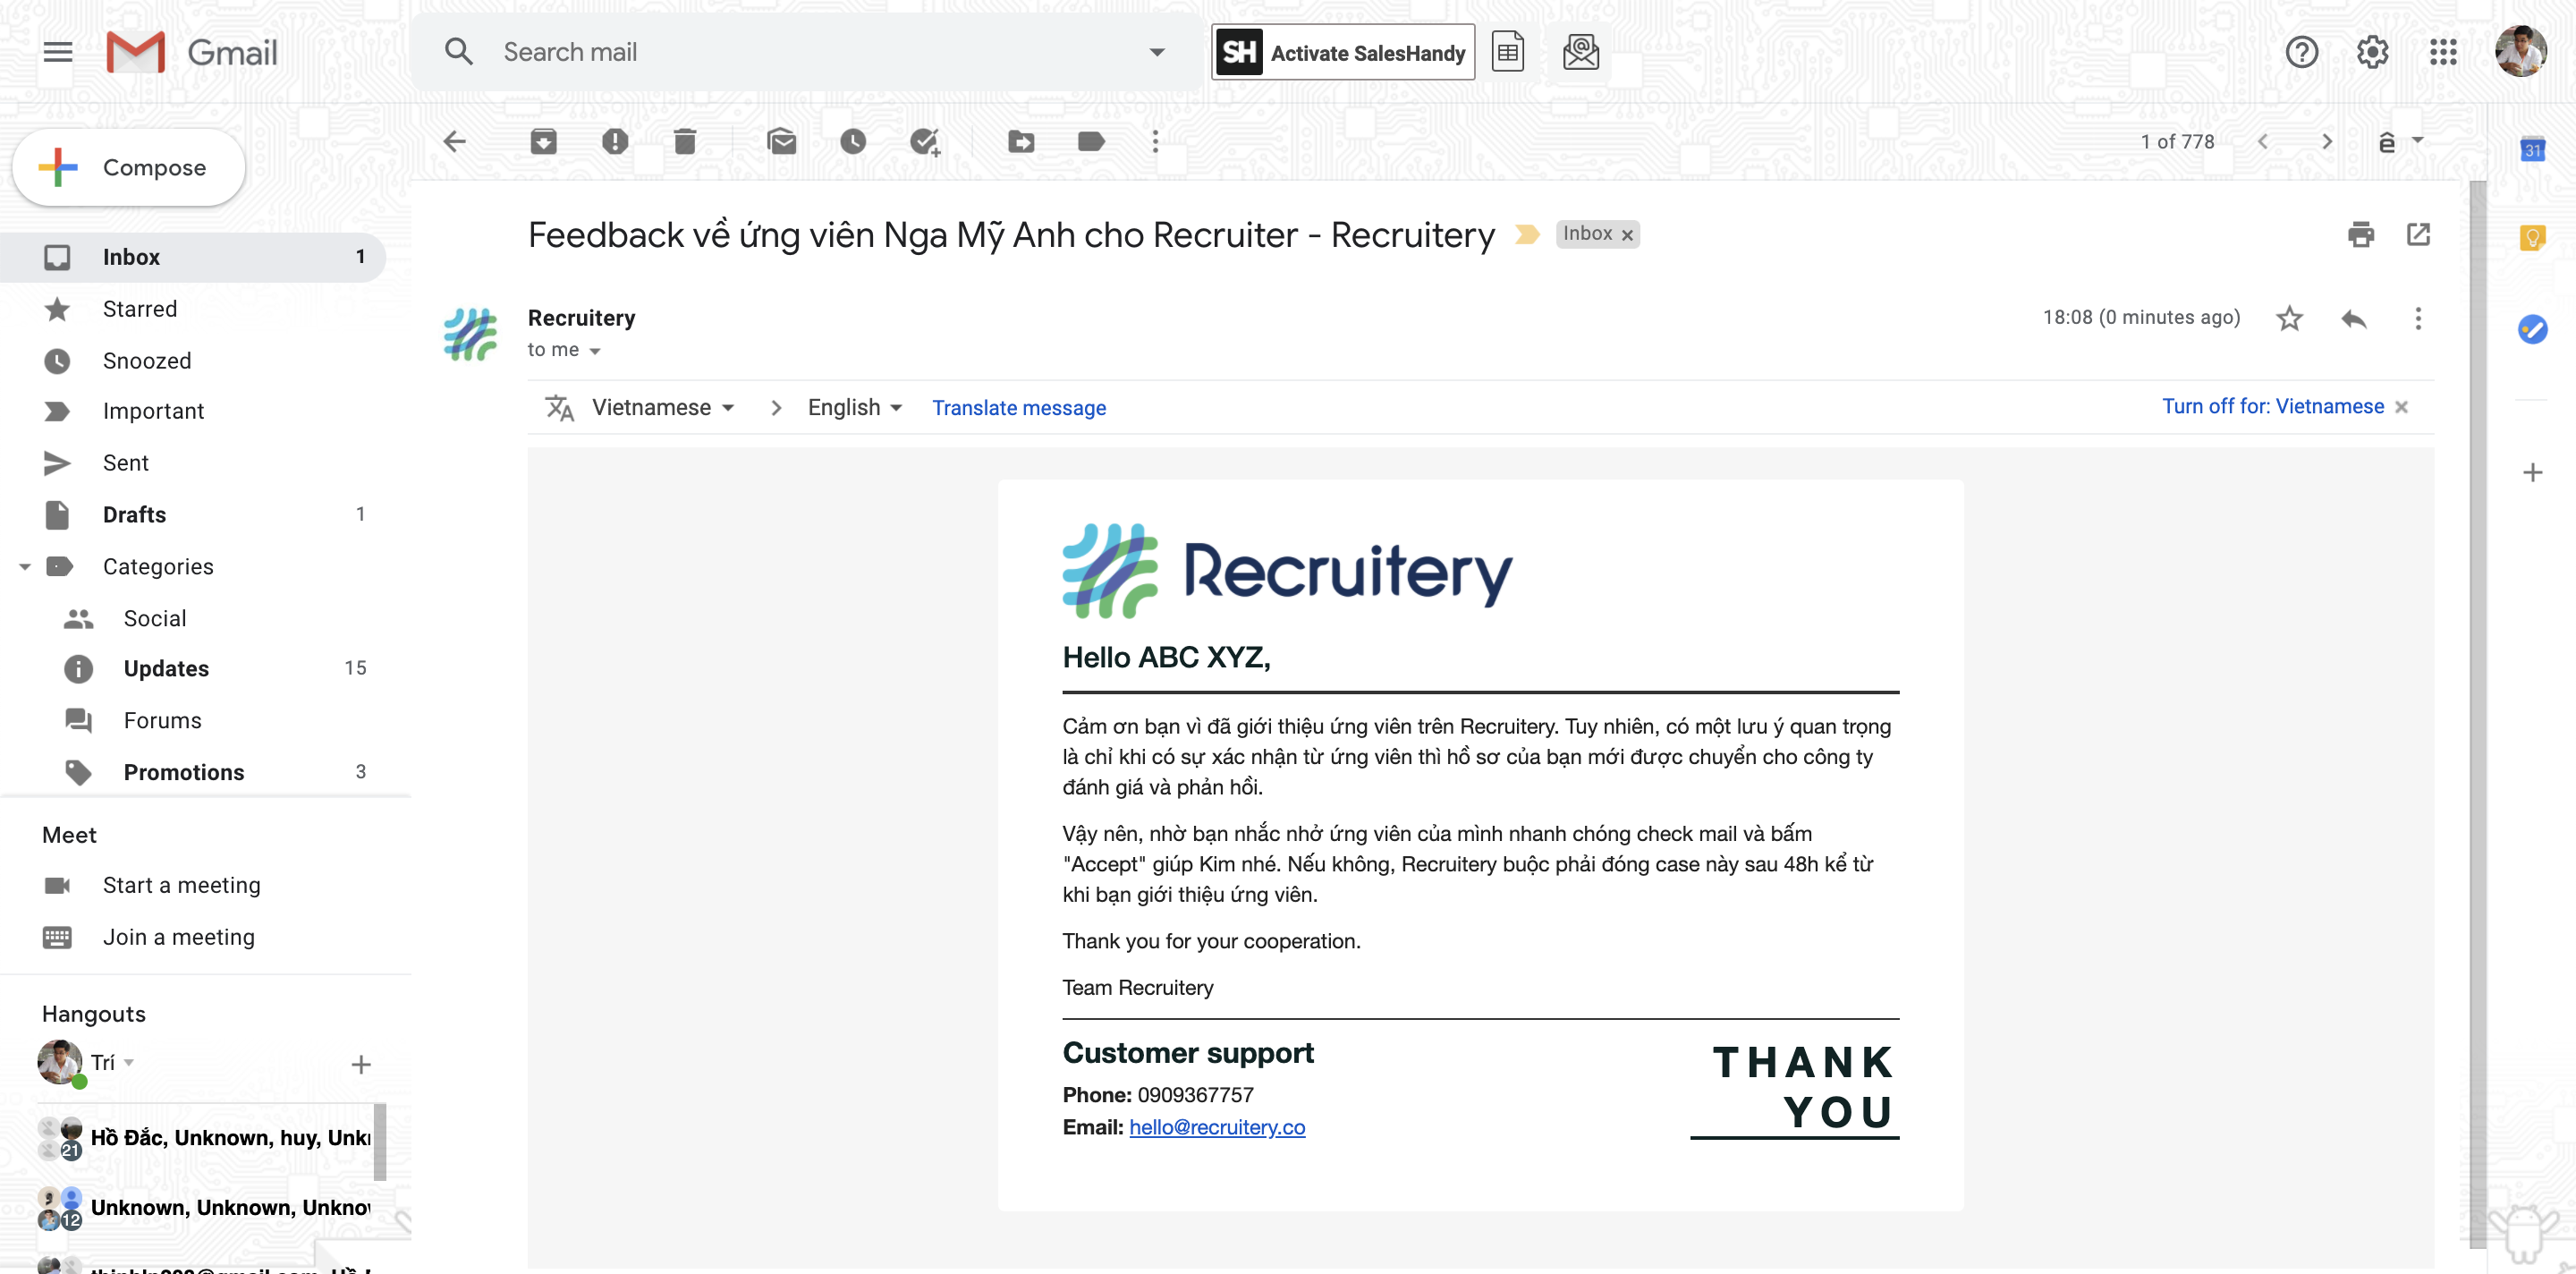 Email hunter - Recruitery